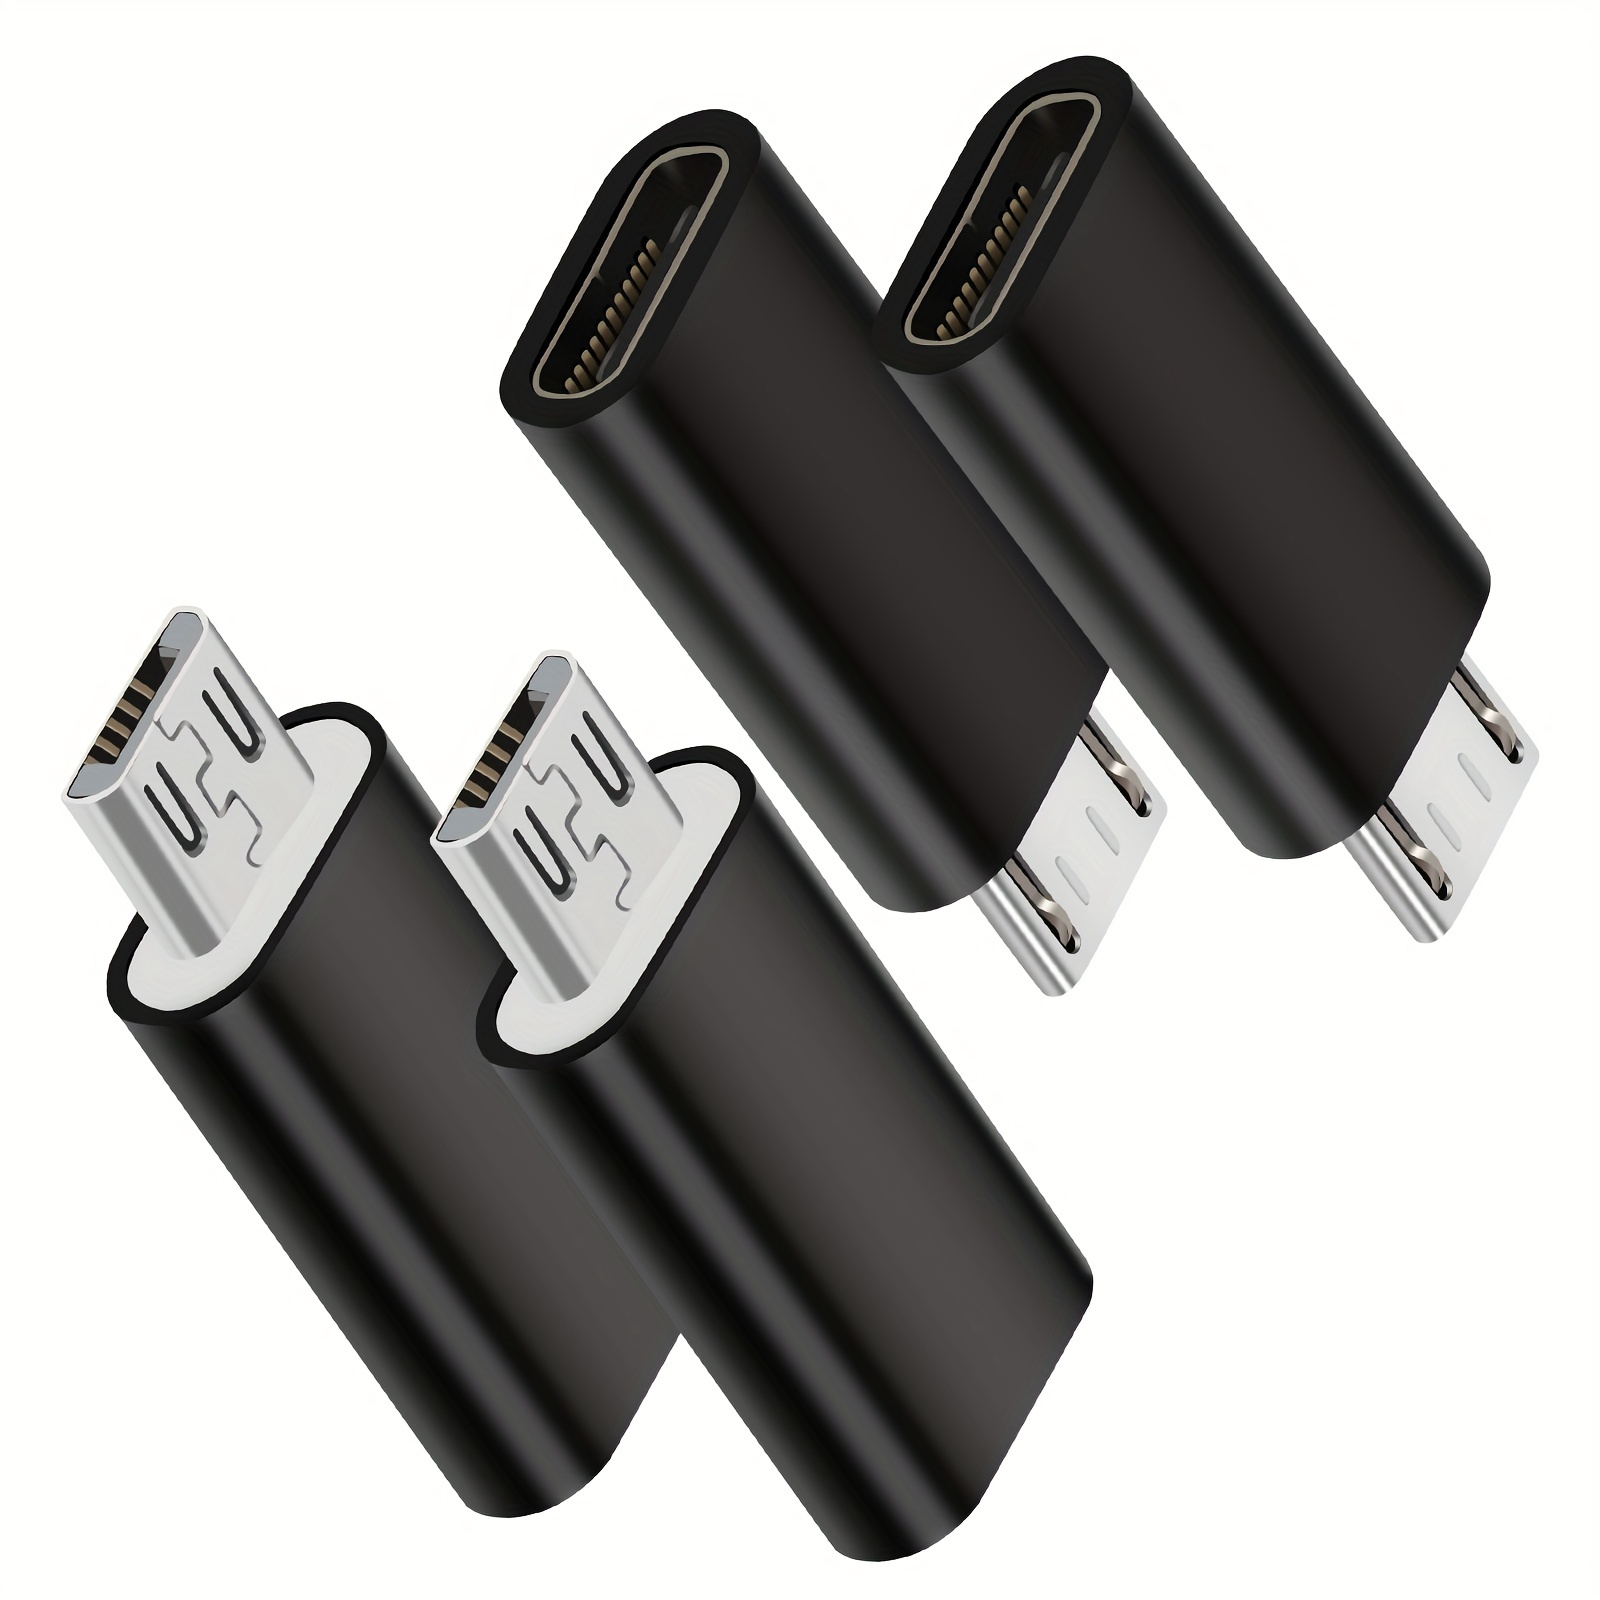 

Usb C To Micro Usb Adapter Pack Of 4 Type C Female To Micro Usb Male Convert Connector Support Charge & Data Sync Compatible With Samsung Galaxy S7 Edge S6 Nexus 5/6 And Micro Usb Devices (black)